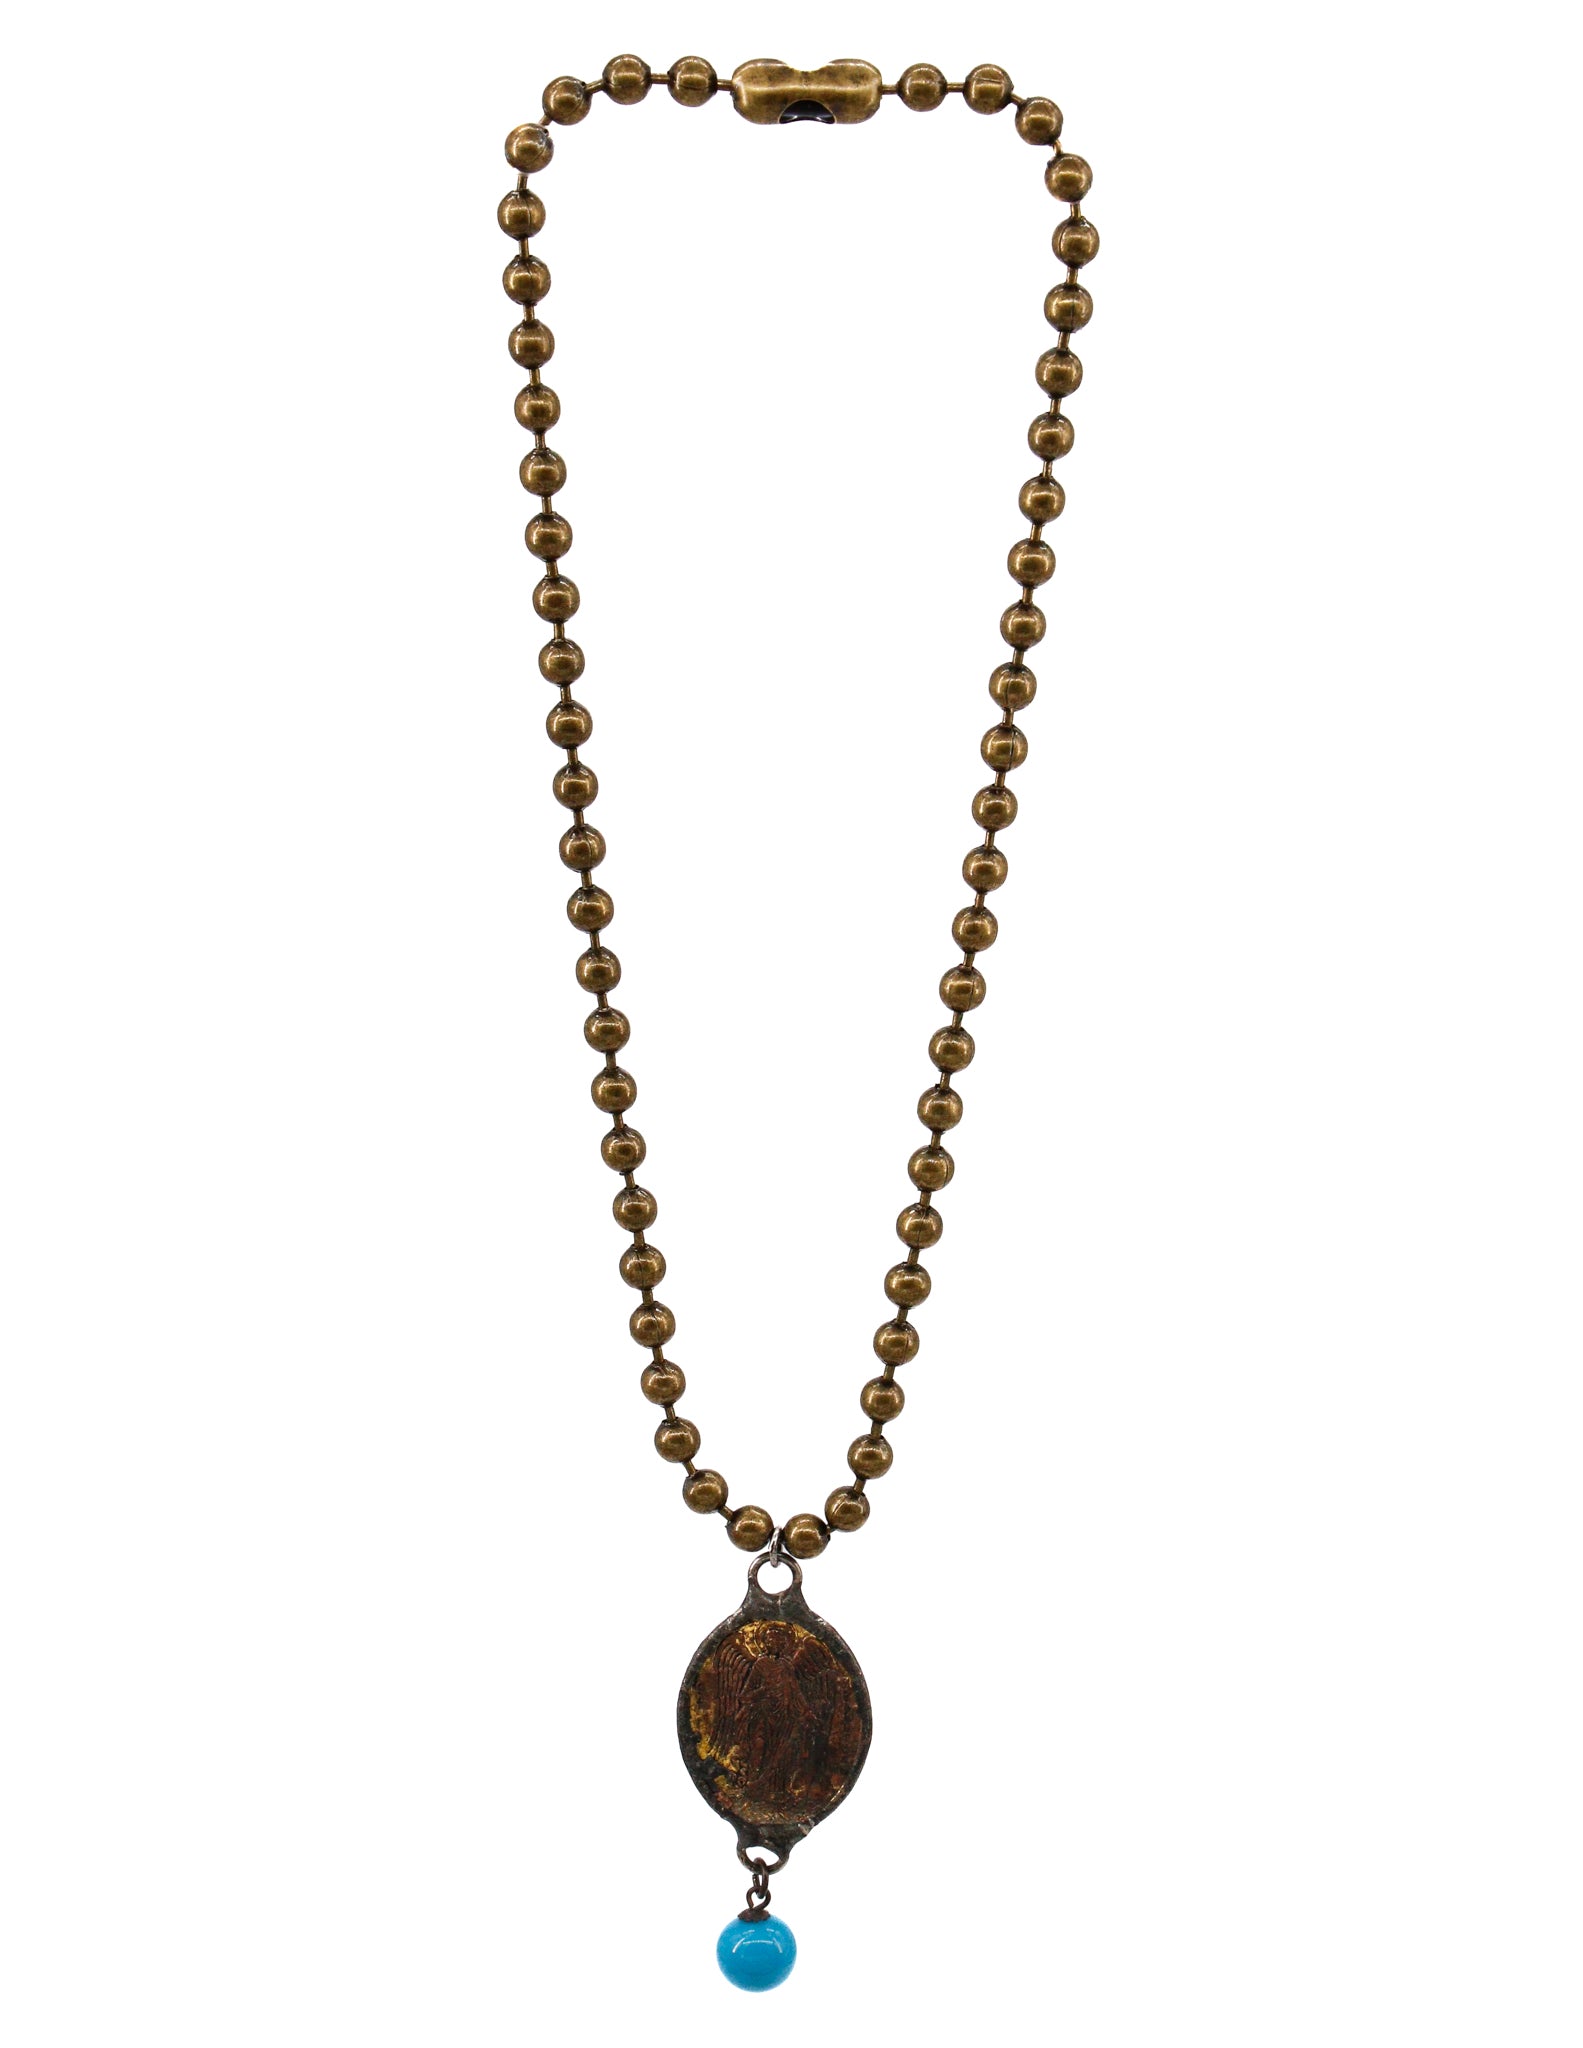 Brass ball chain necklace with a religious medallion and turquoise